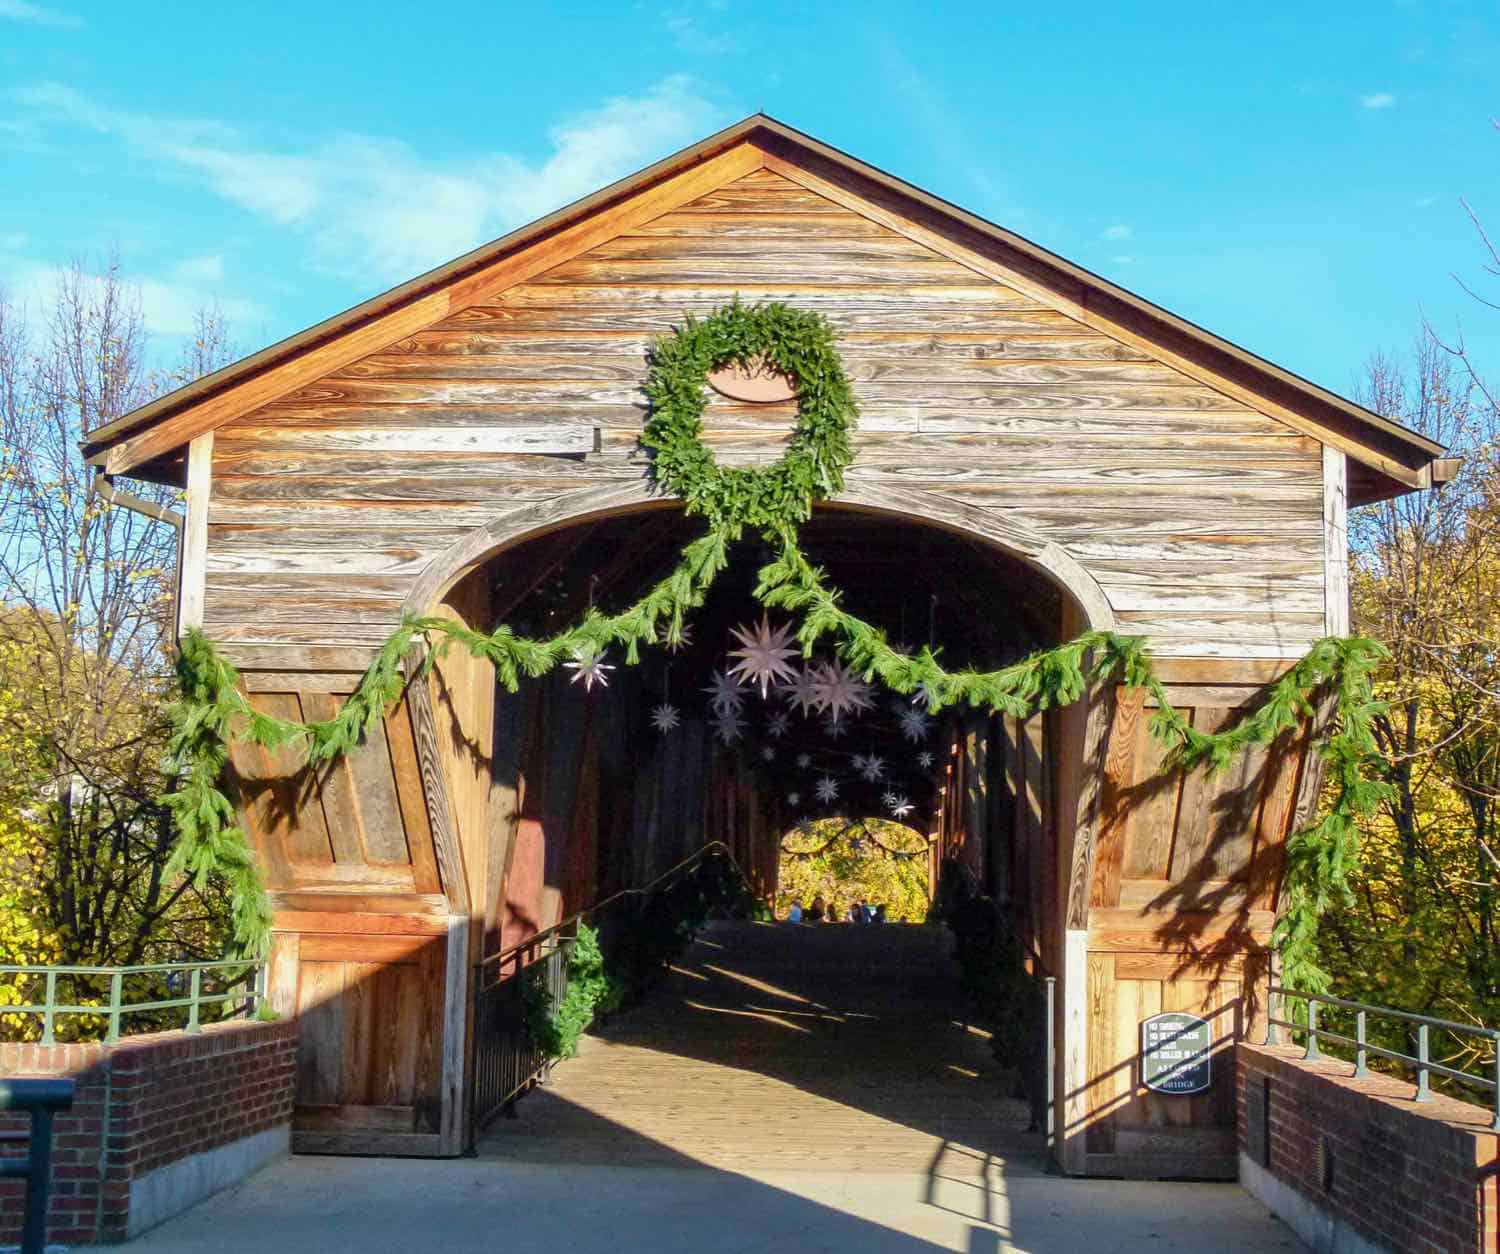 A brown covered bridge decorated with Christmas greenery at the entry to Old Salem near Winston-Salem.